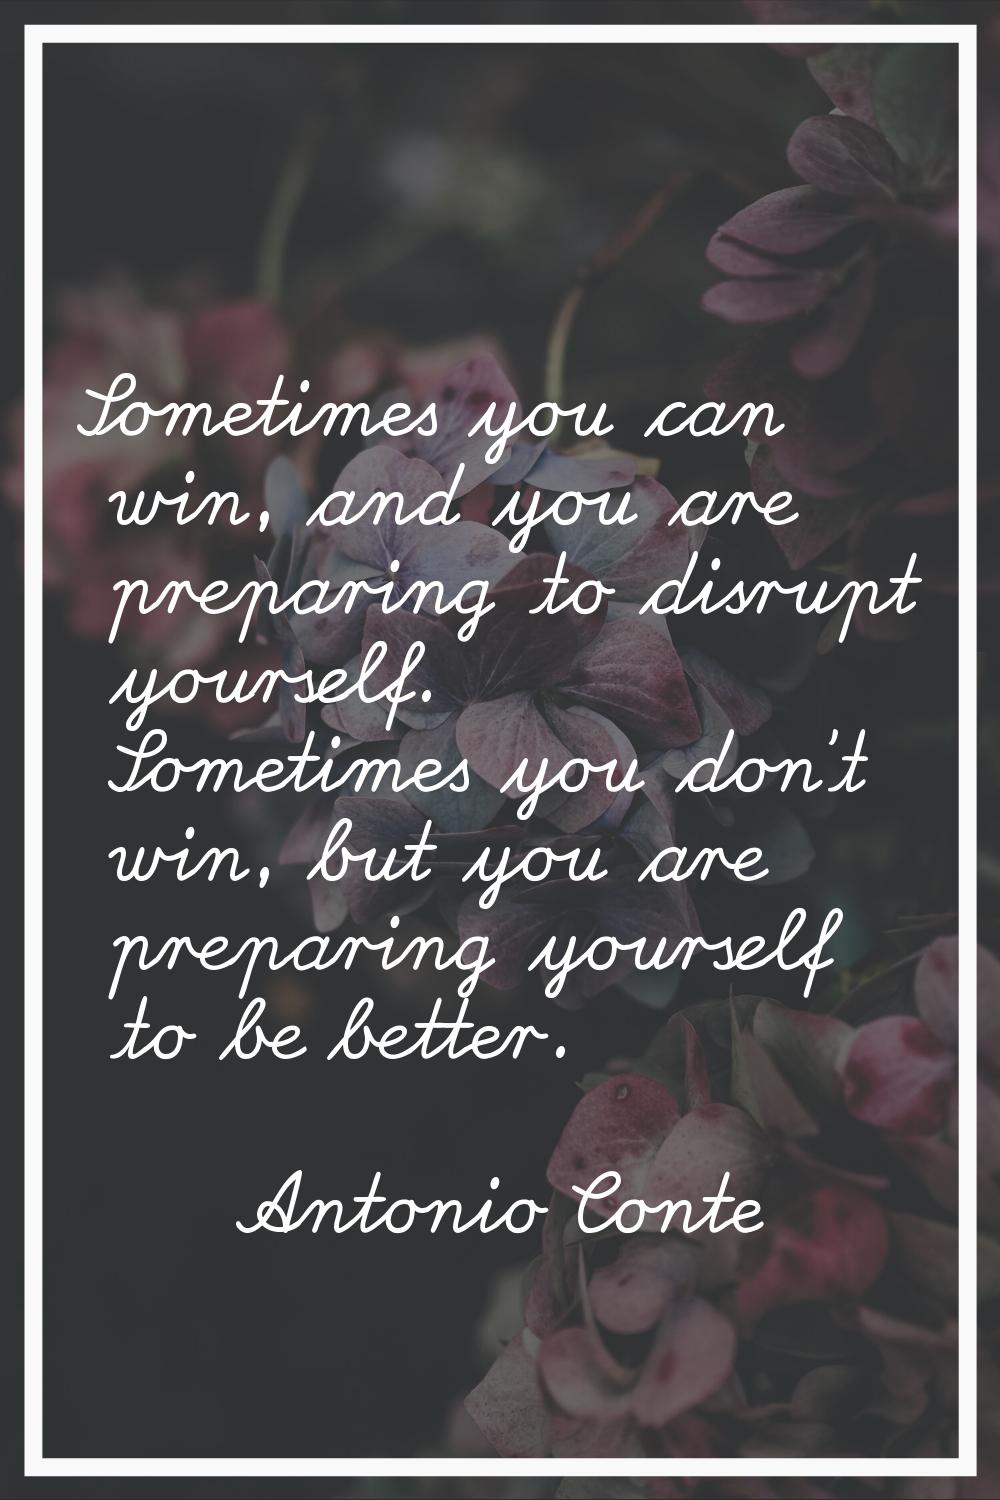 Sometimes you can win, and you are preparing to disrupt yourself. Sometimes you don't win, but you 